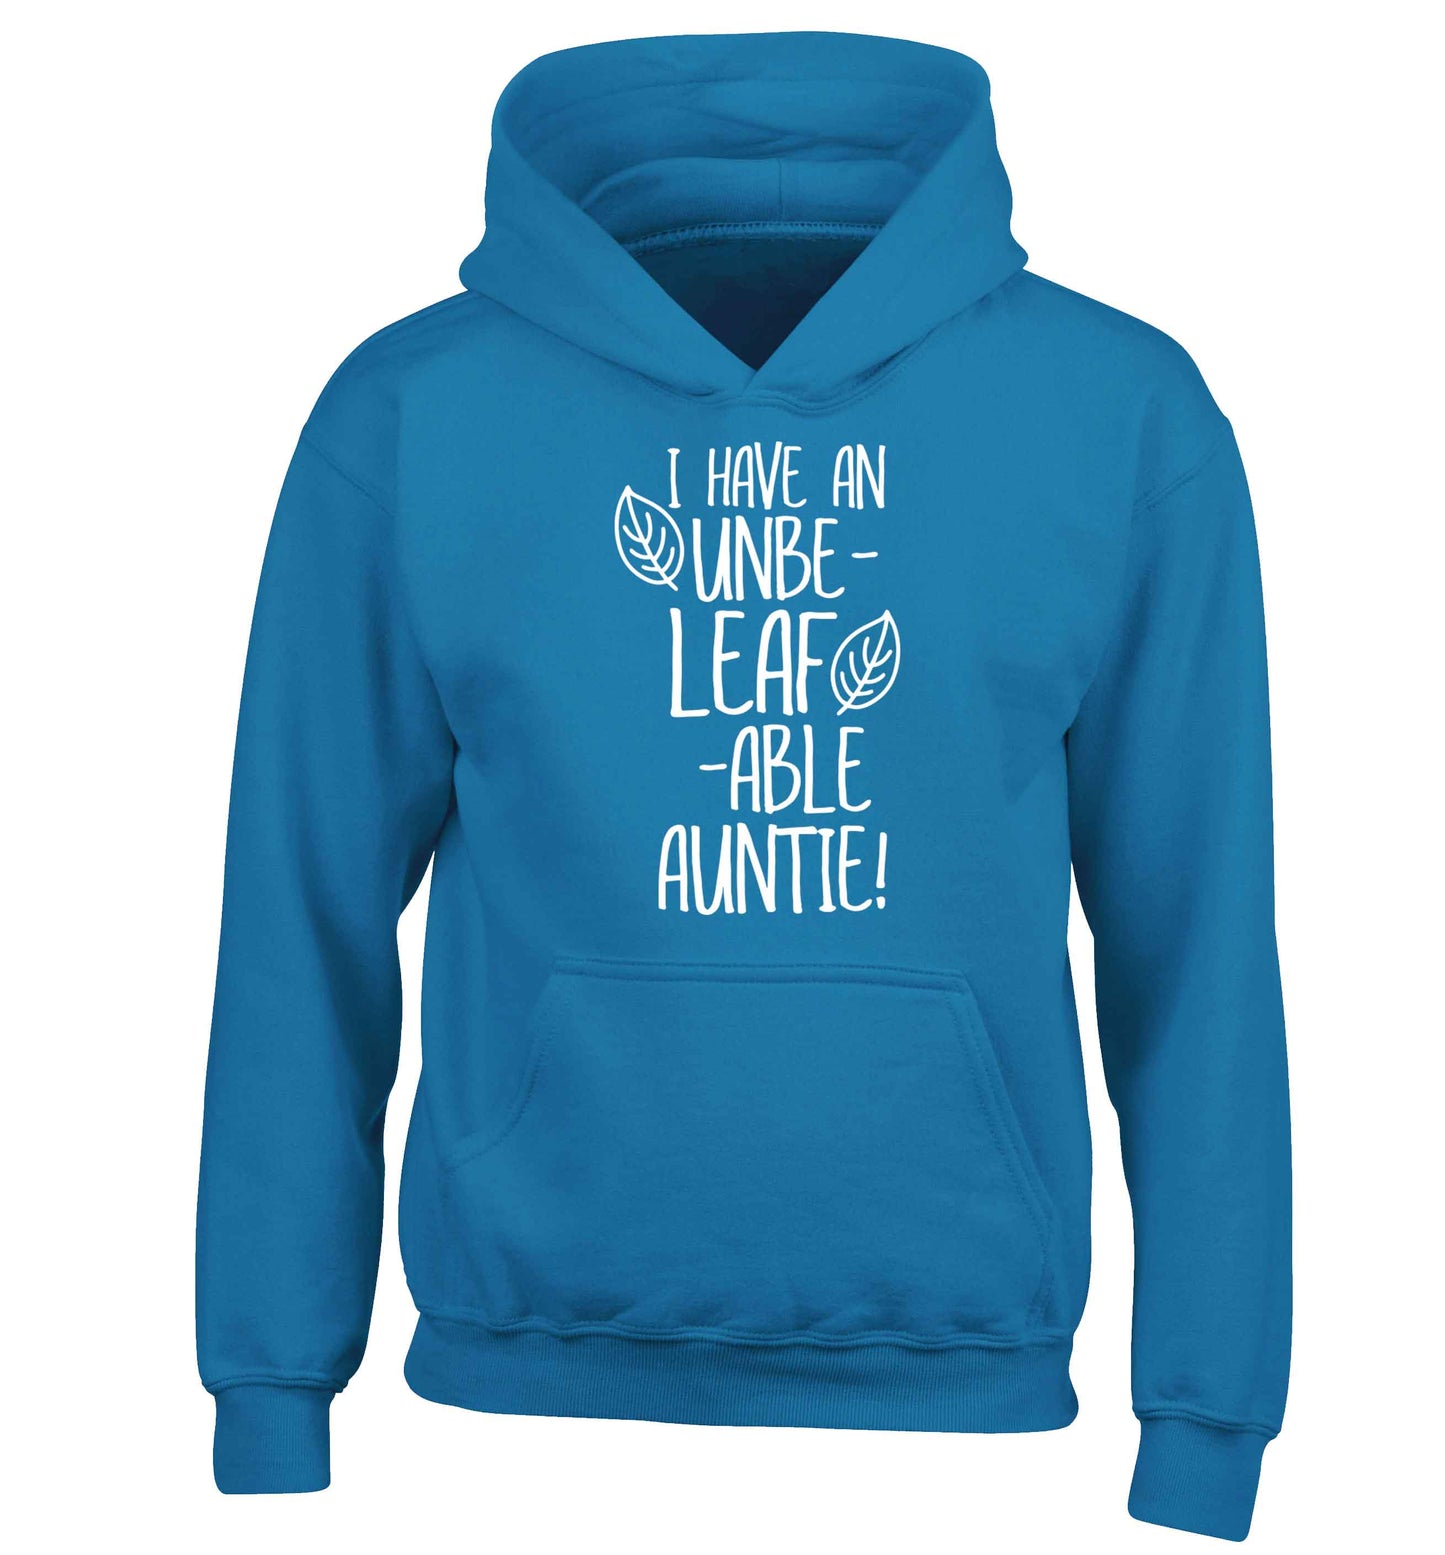 I have an unbe-leaf-able auntie children's blue hoodie 12-13 Years